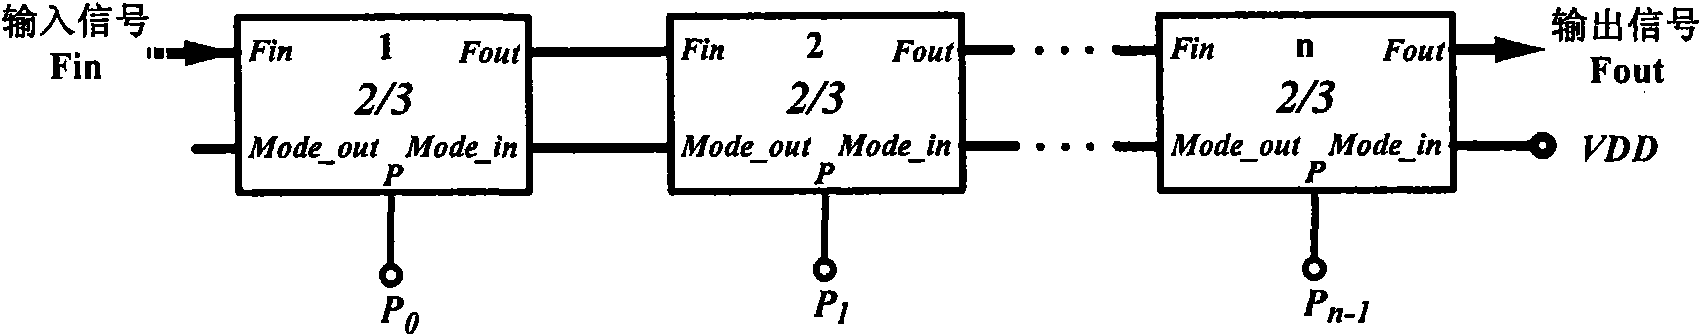 Programmable decimal frequency divider